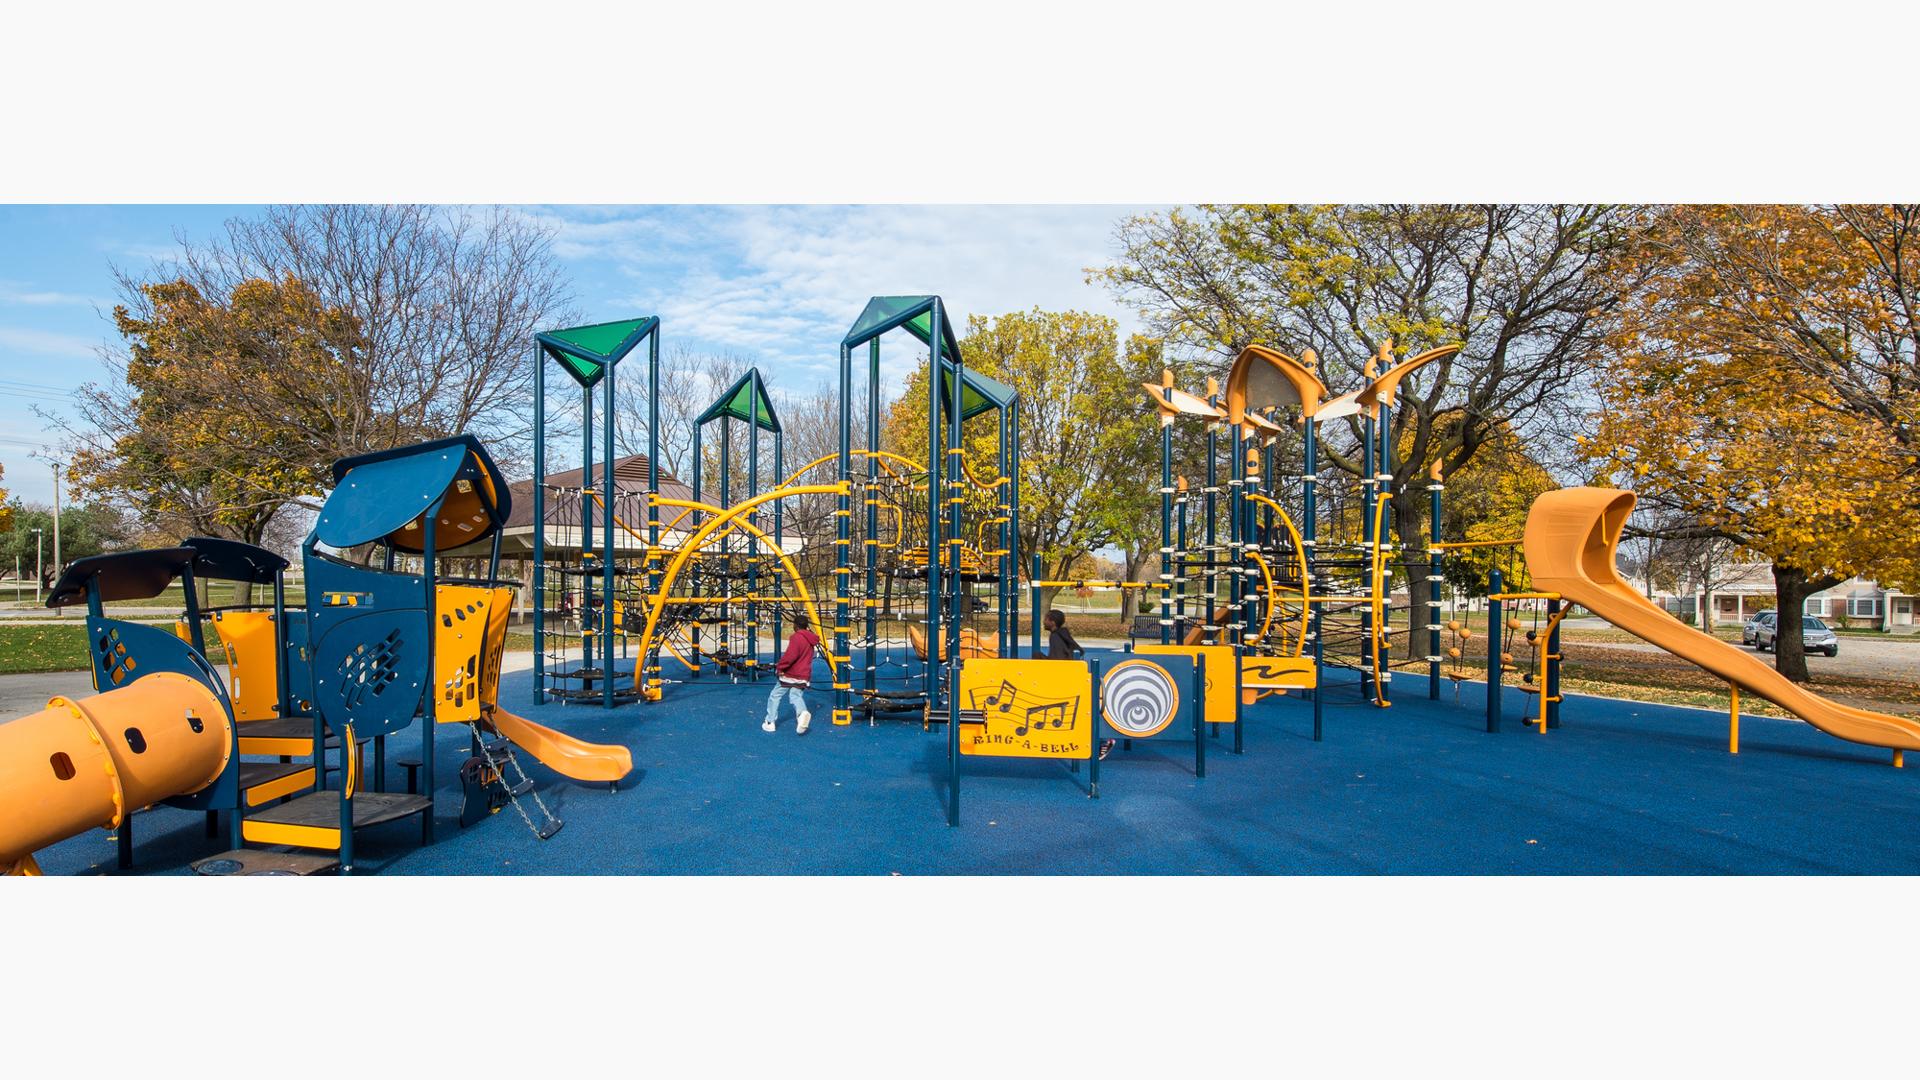 Children run on the blue playground safety surfacing amongst the navy blue and gold colored play structures with rope climbers, play panels, and slides.